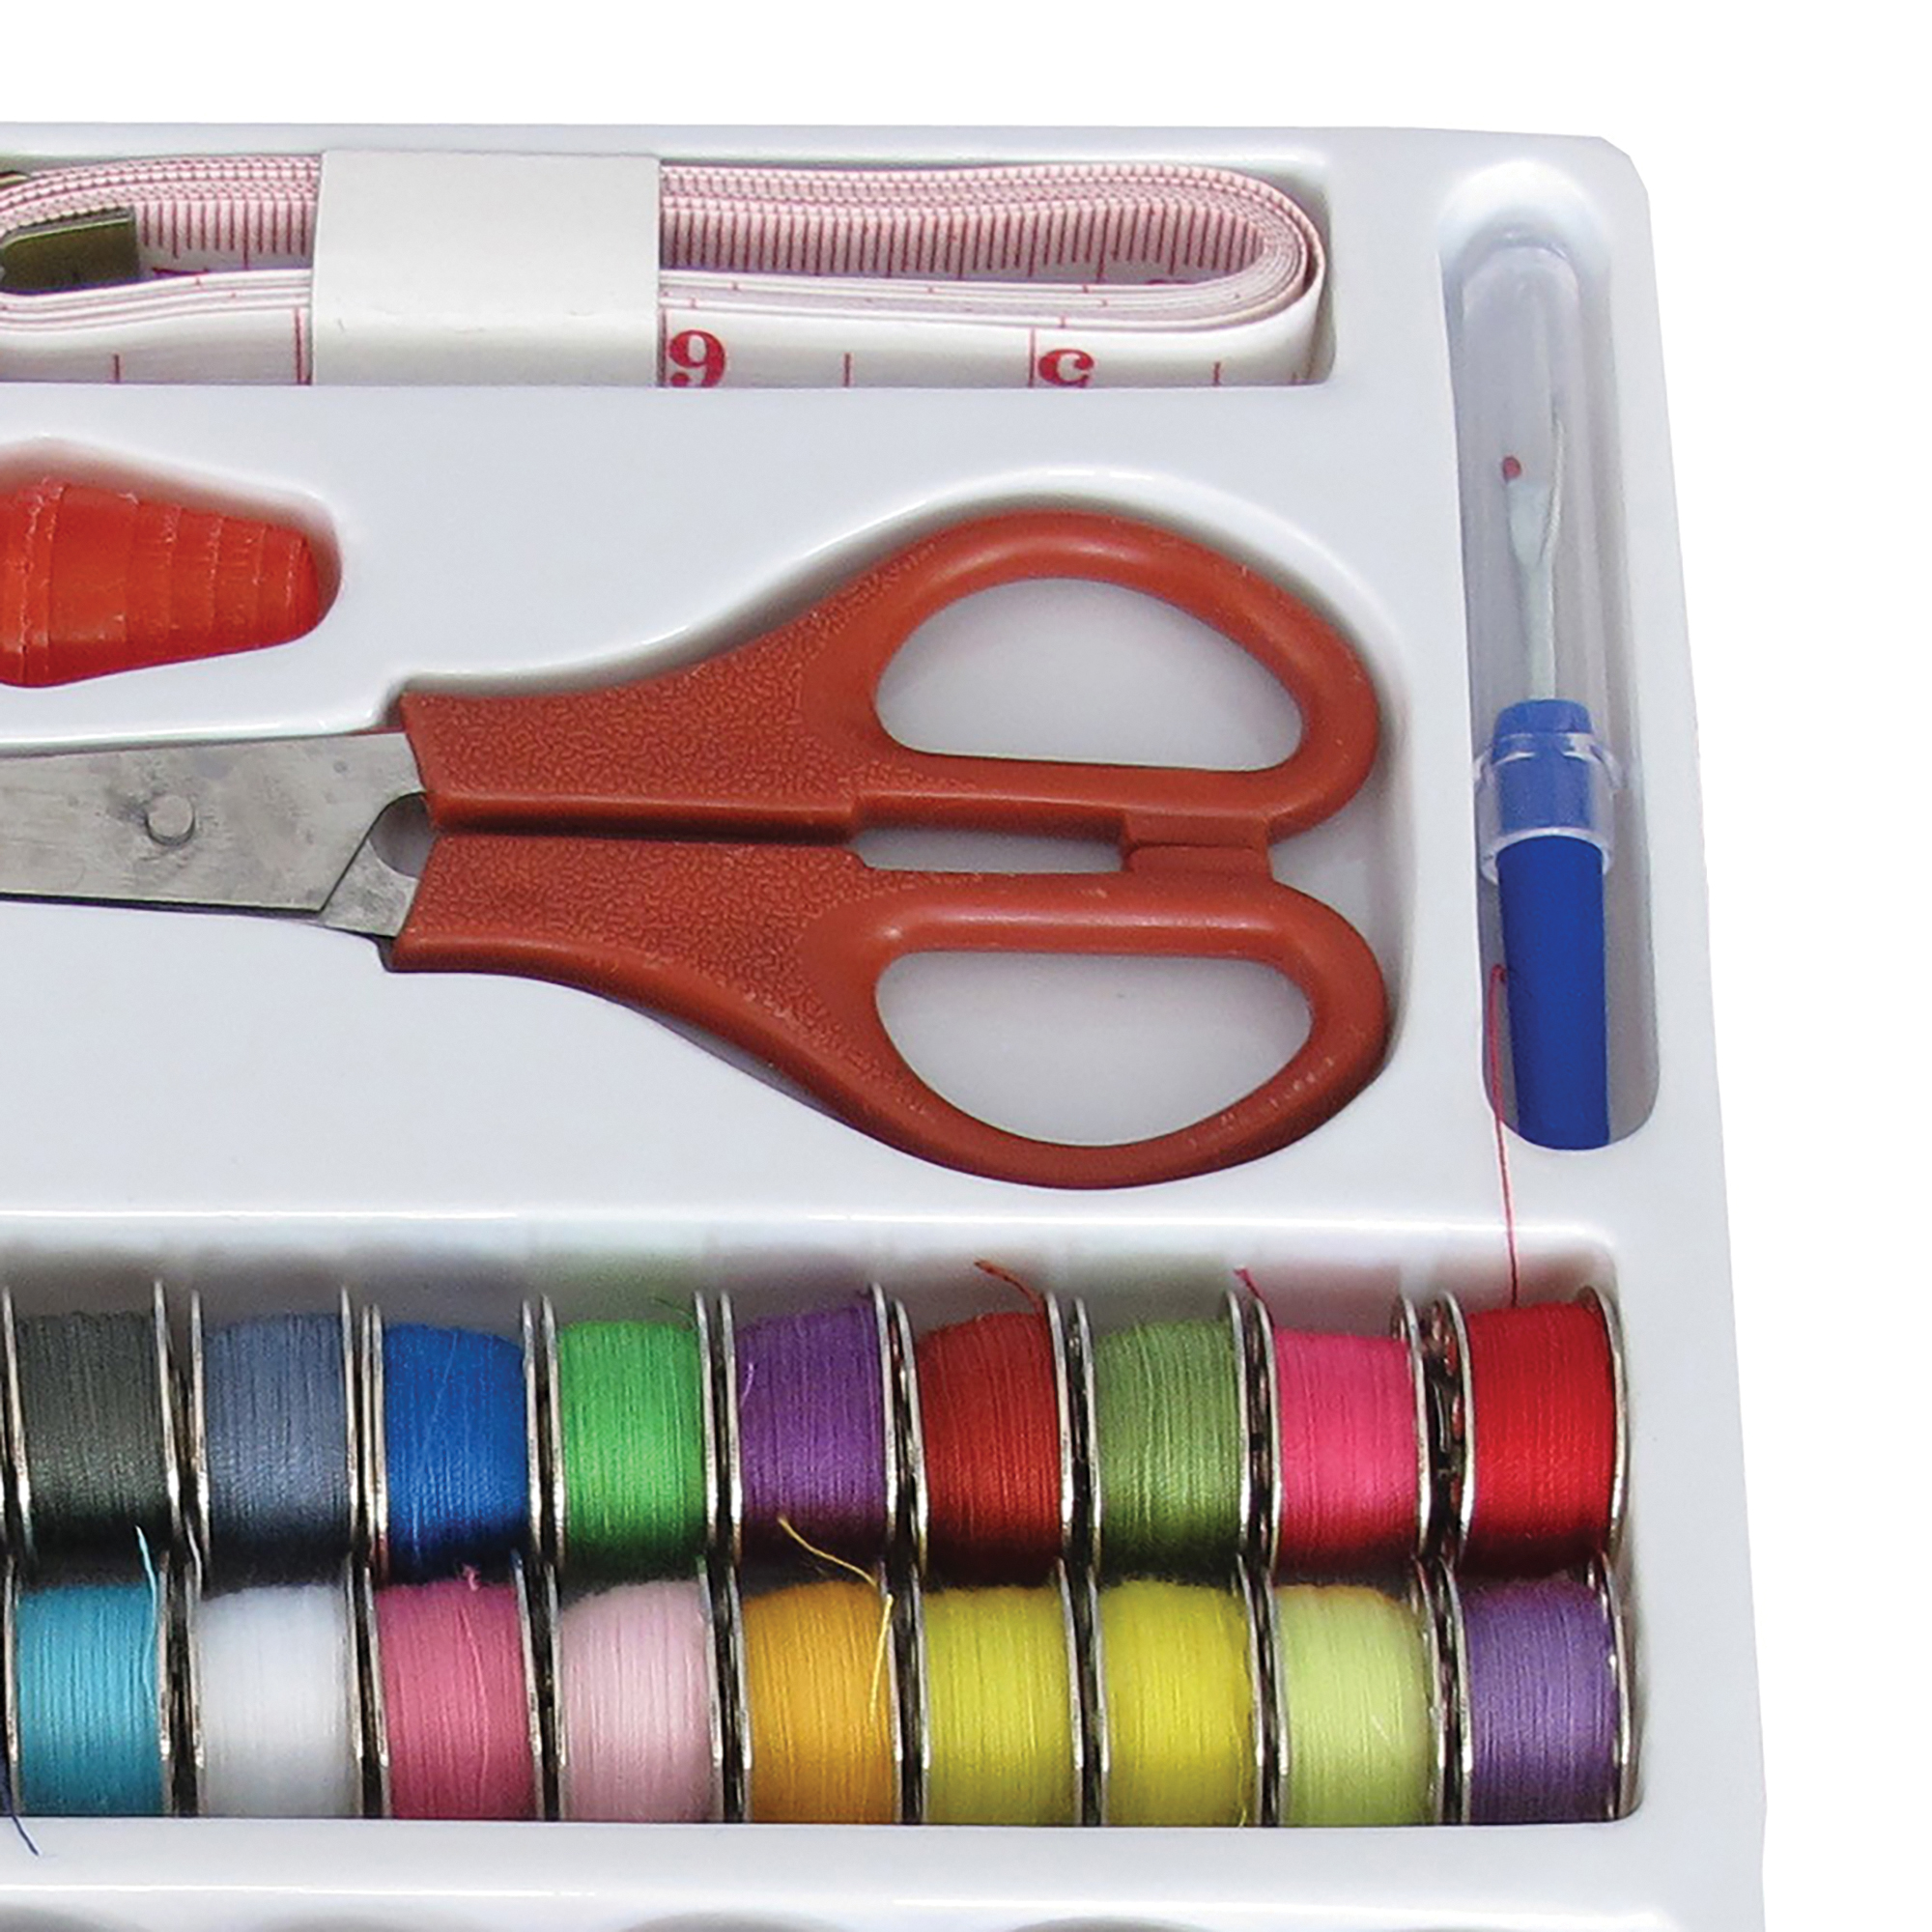 Michley Fs-092 Sewing Kit With 100 Pieces Including Thread Spools, Bobbins, Scissors, Needles, Thimbles, And More - image 5 of 5